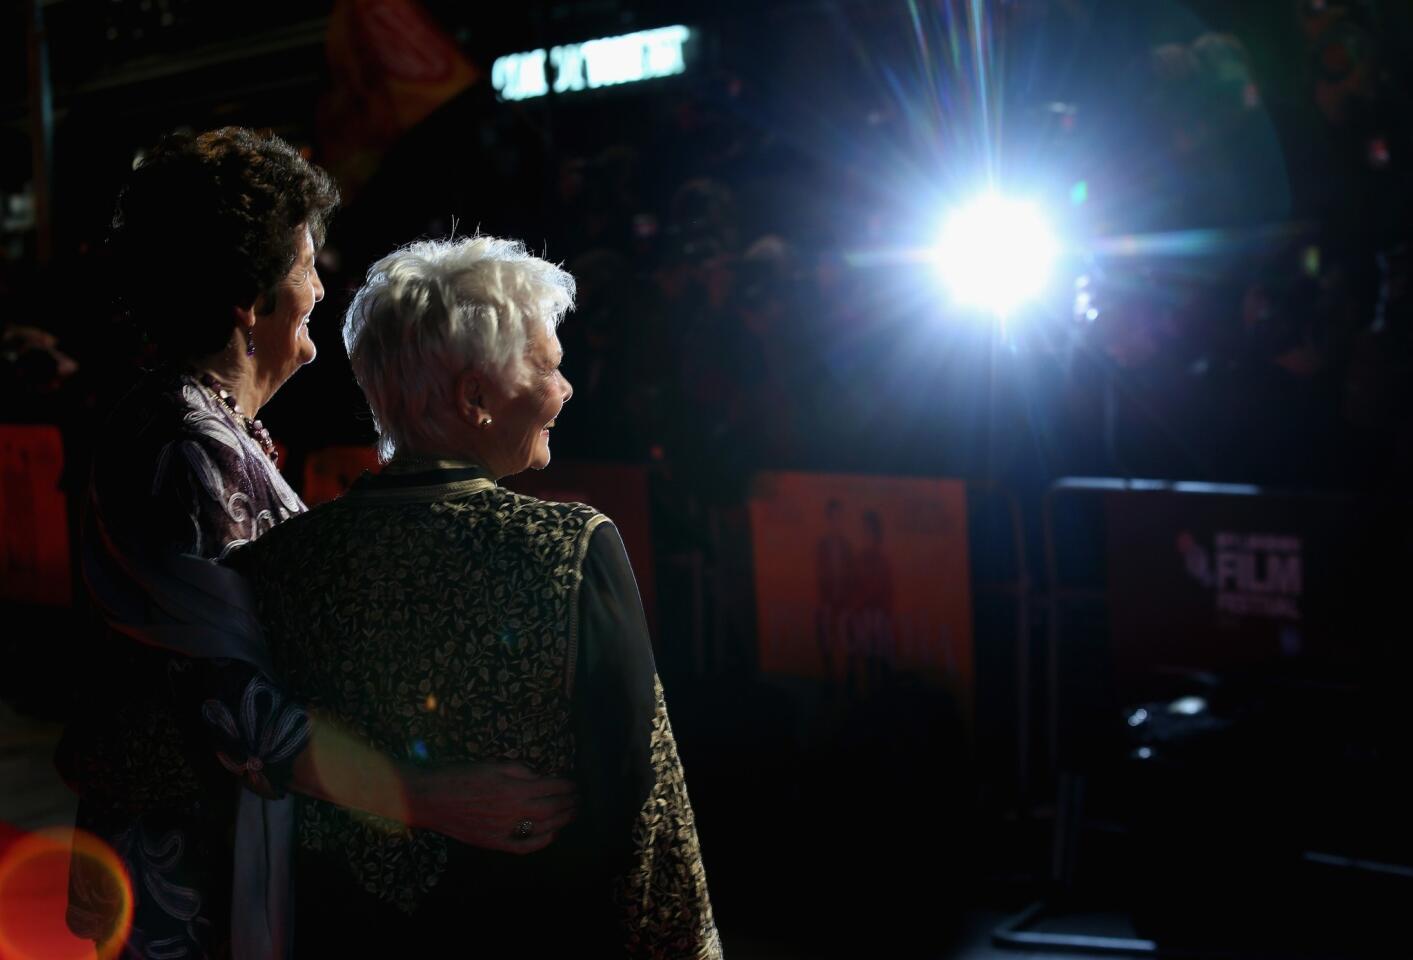 Actress Dame Judi Dench, right, and Philomena Lee attend the "Philomena" American Express Gala screening during the 57th BFI London Film Festival at Odeon Leicester Square on Oct. 16, 2013, in London.